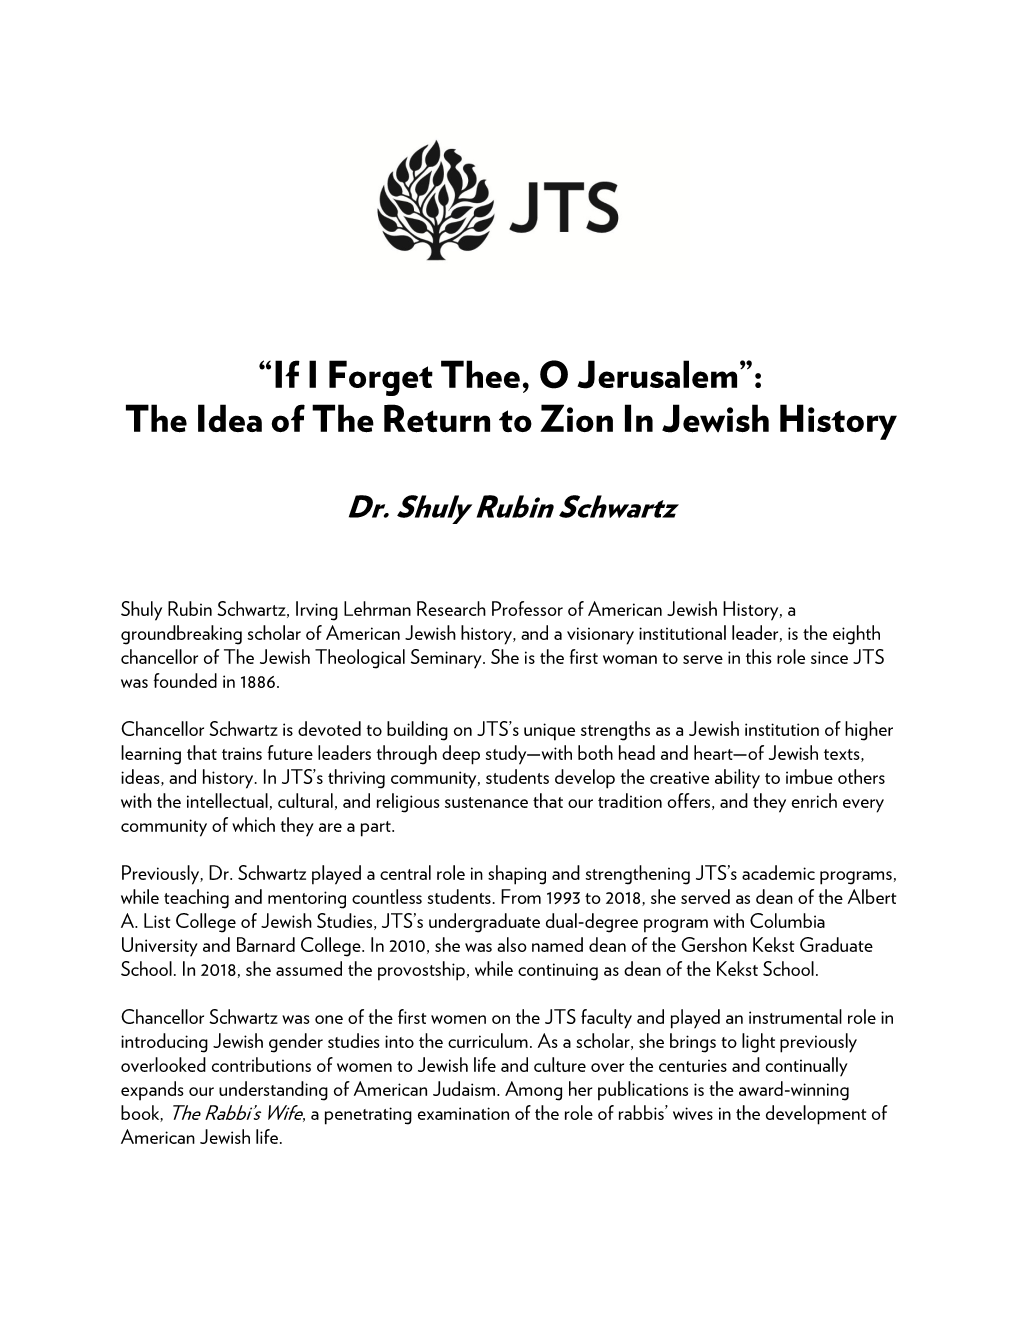 “If I Forget Thee, O Jerusalem”: the Idea of the Return to Zion in Jewish History